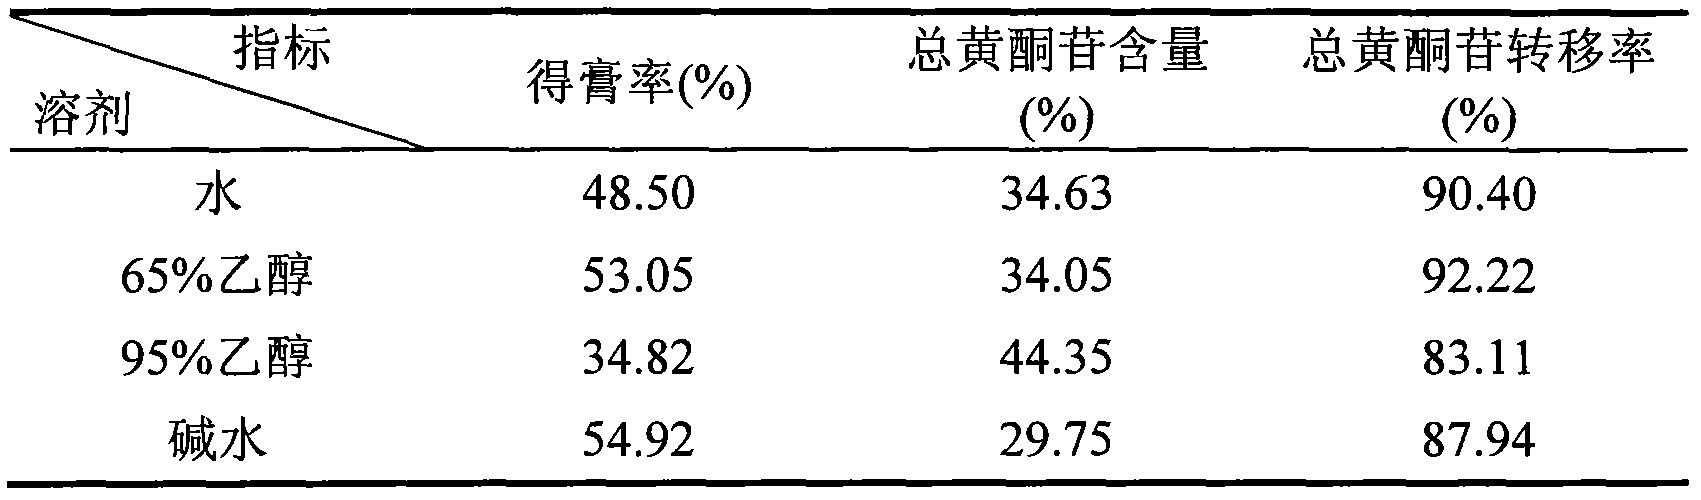 Immature bitter orange or bitter orange total flavonoids extract prepared by ethanol reflux and extraction and application thereof